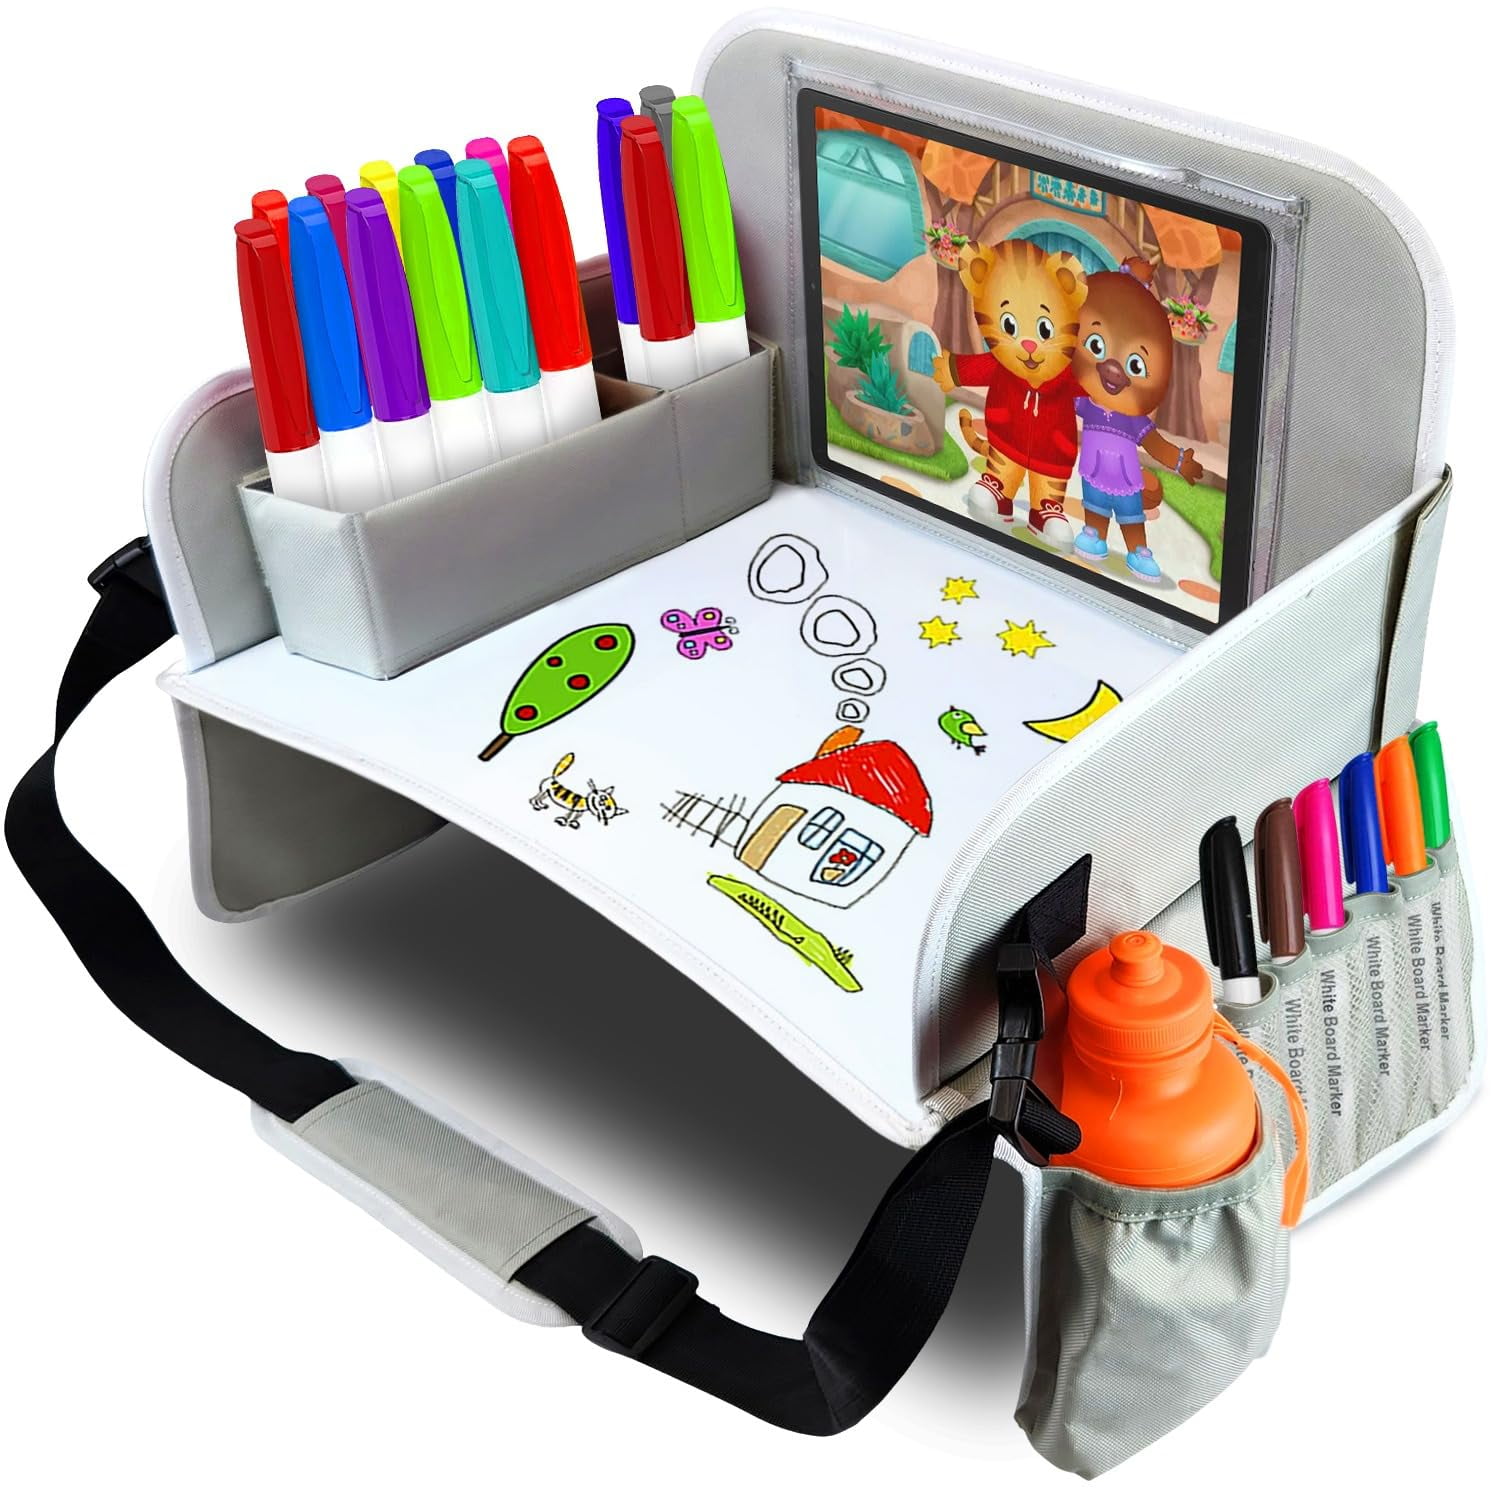 Kids Travel Lap Tray By RazzTots – Children's Portable Lap Activity Desk  With Cup Holder & Mesh Pockets, Waterproof Surface with PVC Board, Eating  & Playing &…